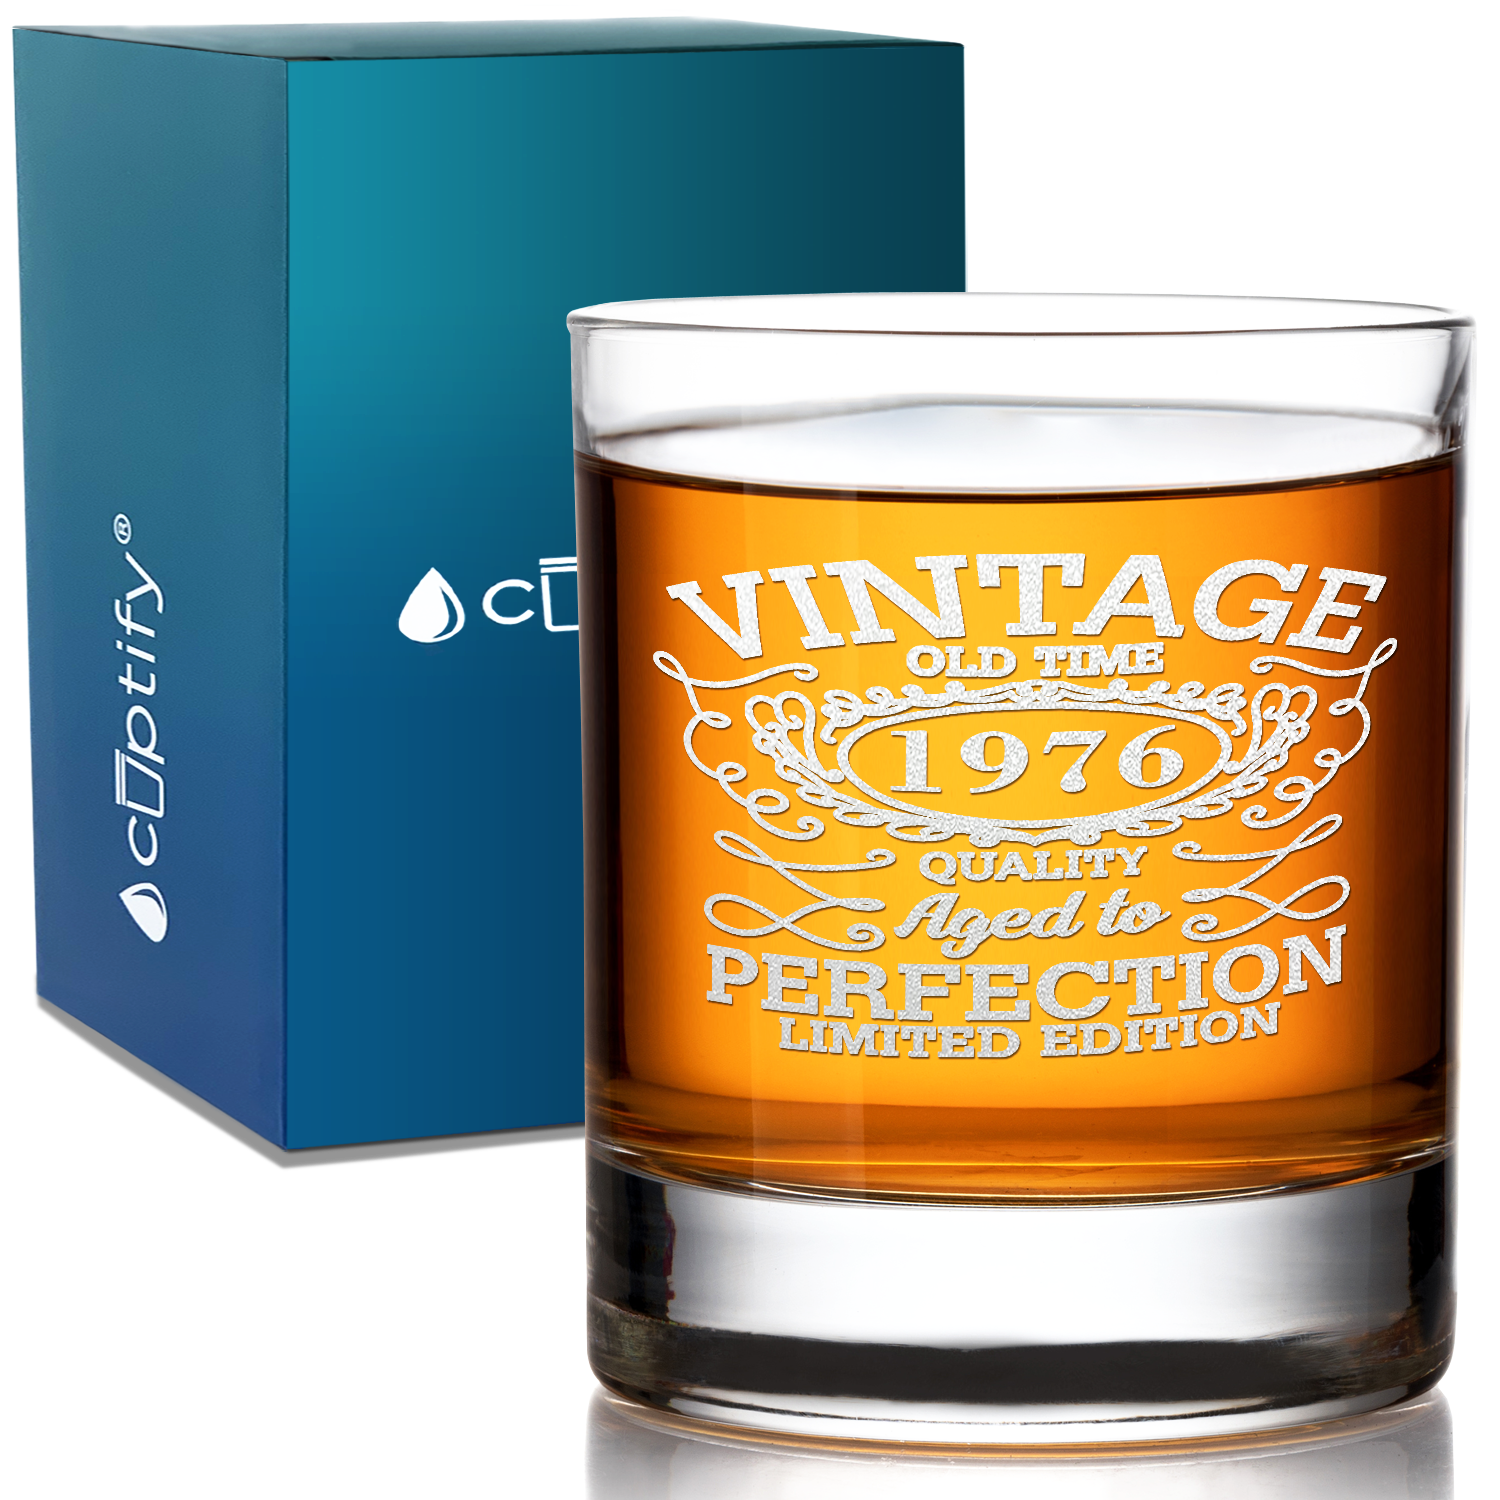 45th Birthday Vintage 45 Years Old Time 1976 Quality Laser Engraved 10.25oz Old Fashion Glass